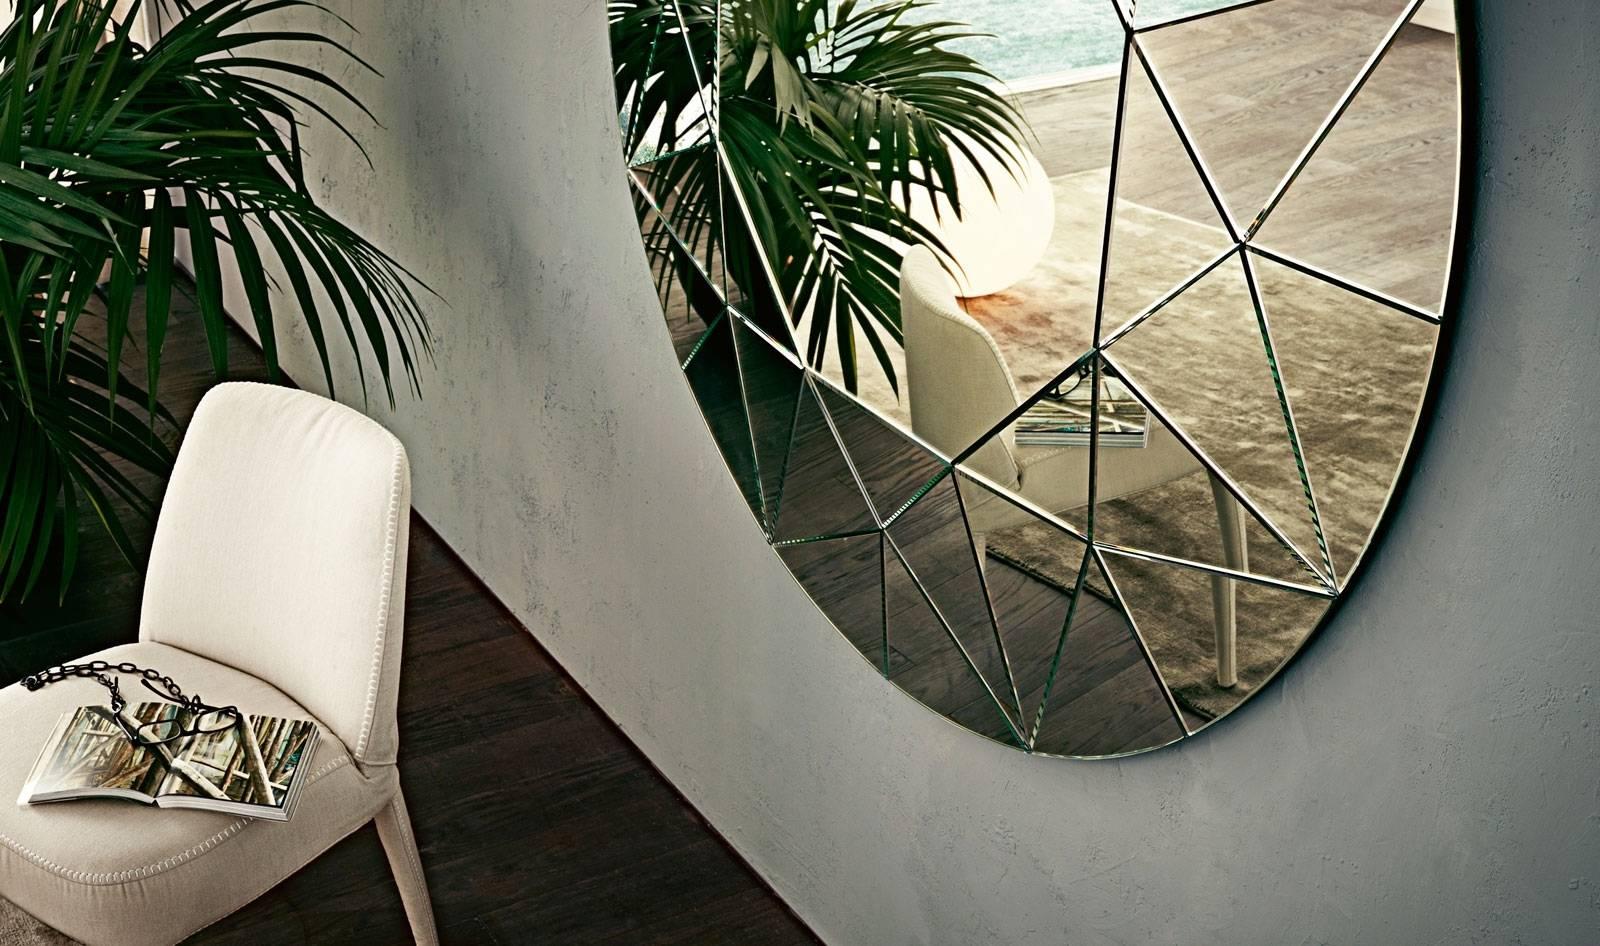 Hand polished mirror with octagonal central part and frame composed of 40 inclined mirrors on different levels.

Designed by Ricardo Bello Dias for Gallotti & Radice. Produced in Italy. 

Sizes cm:
ø 120 x 6
ø 150 x 6

Inches:
Ø 47 1/4 x 2 1/2
Ø